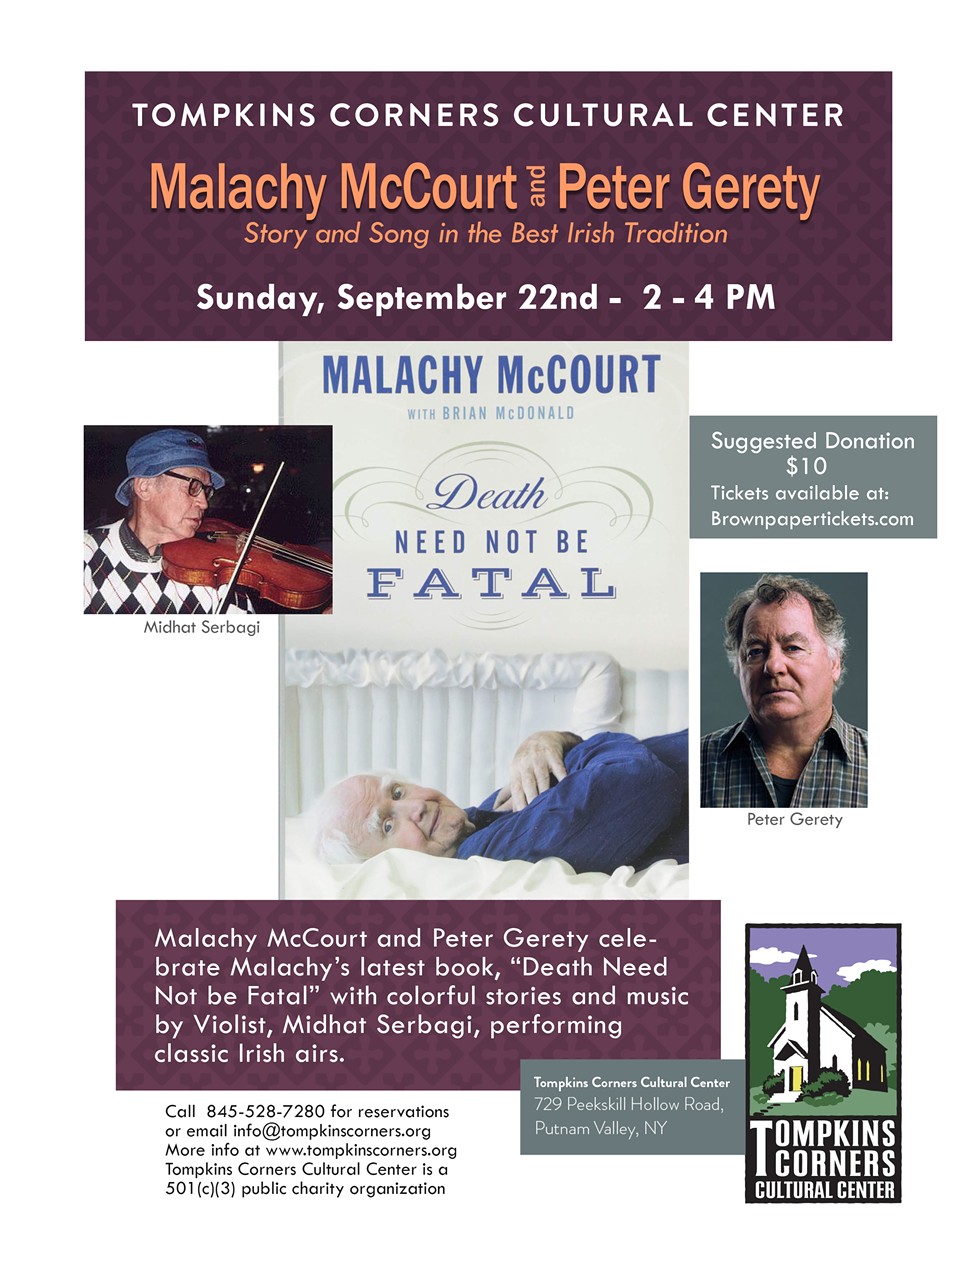 Malachy McCourt and Peter Gerety at TCCC